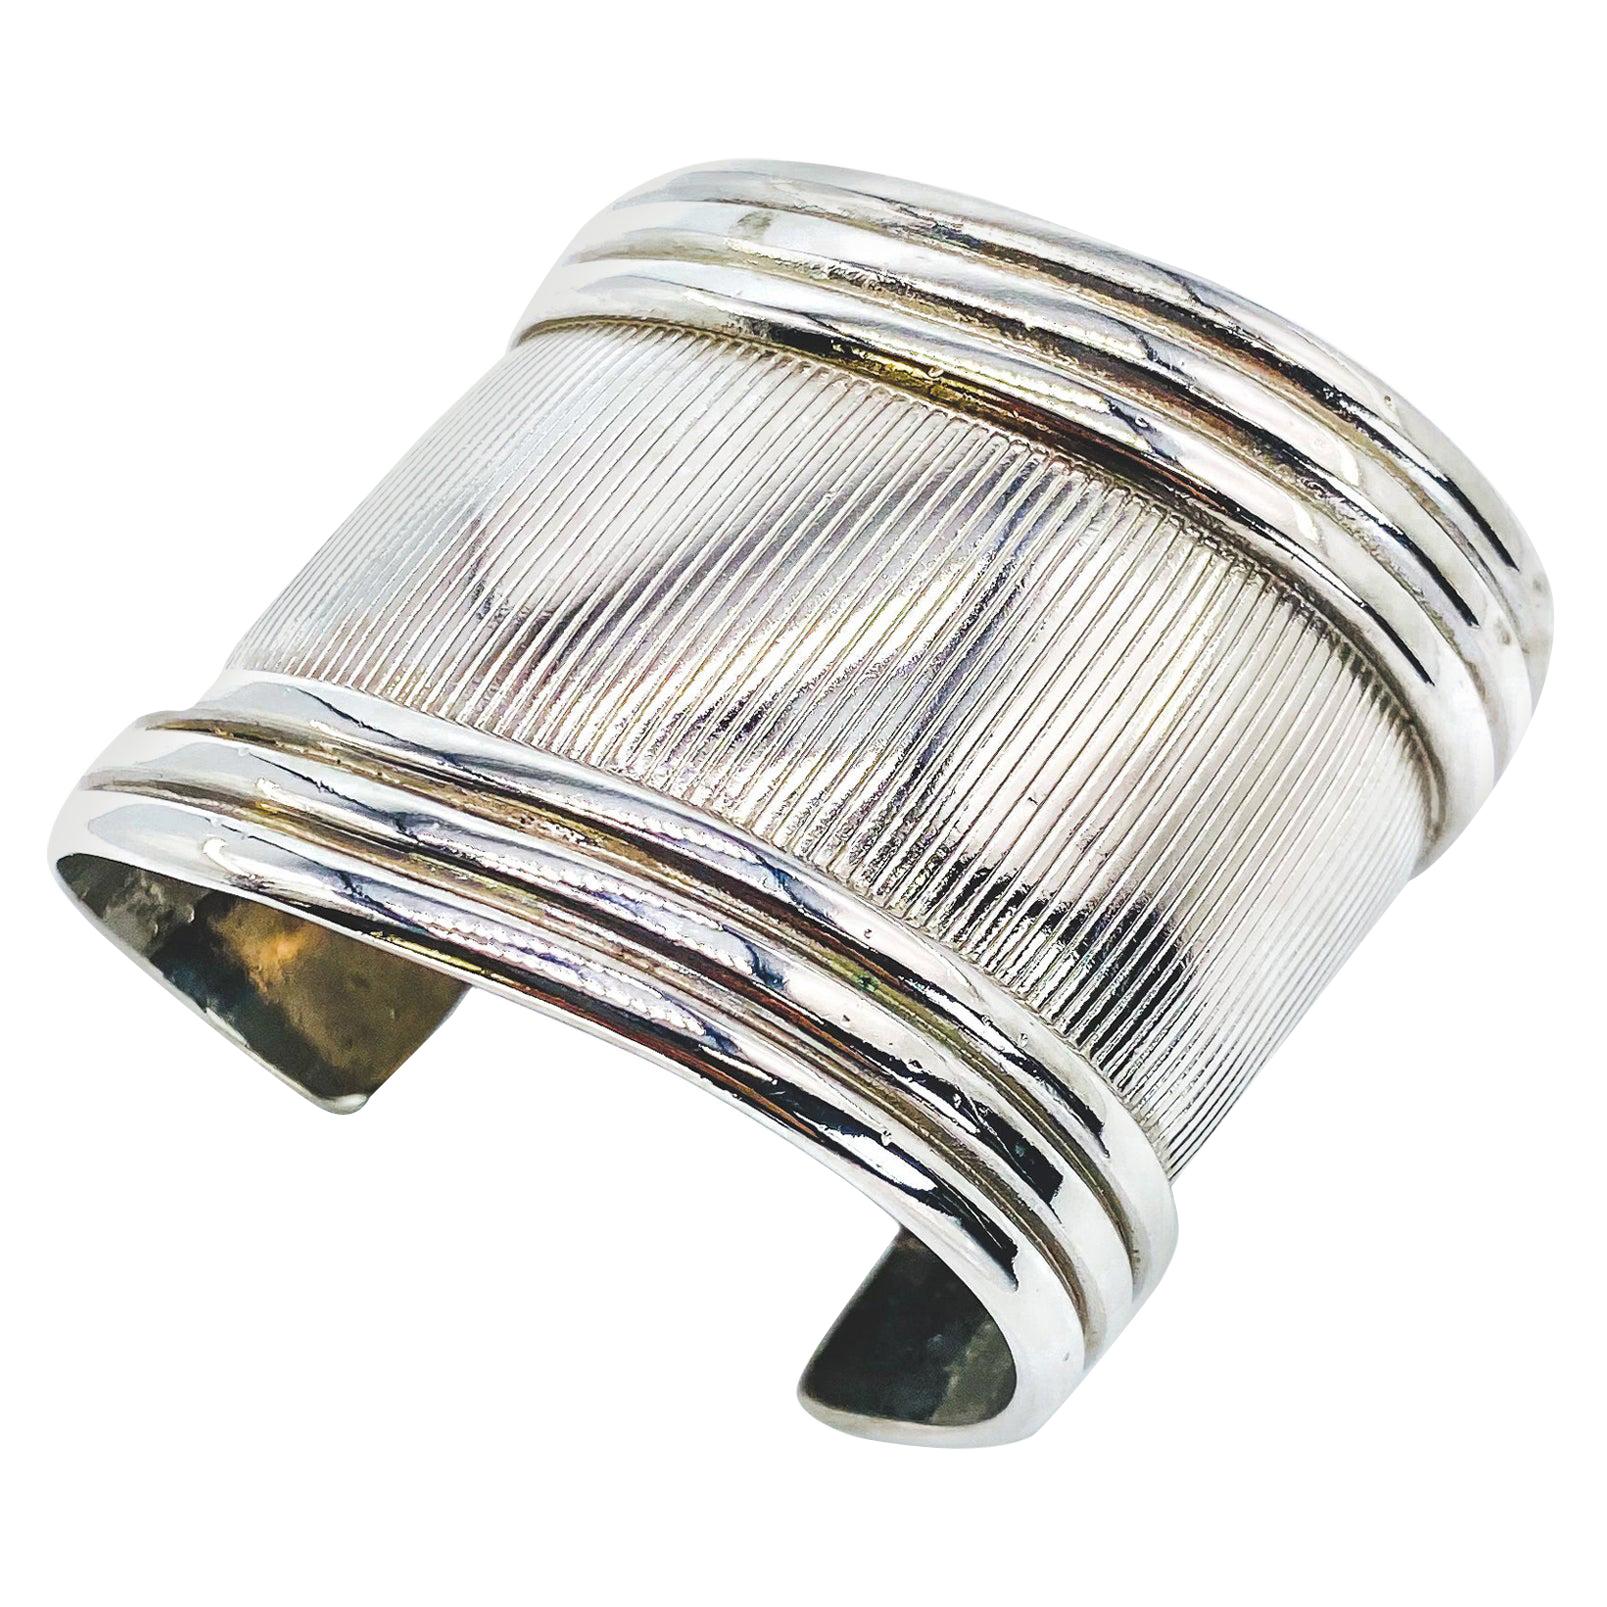 Vintage GIANNI VERSACE Silver Plated Cuff Bracelet 1990s